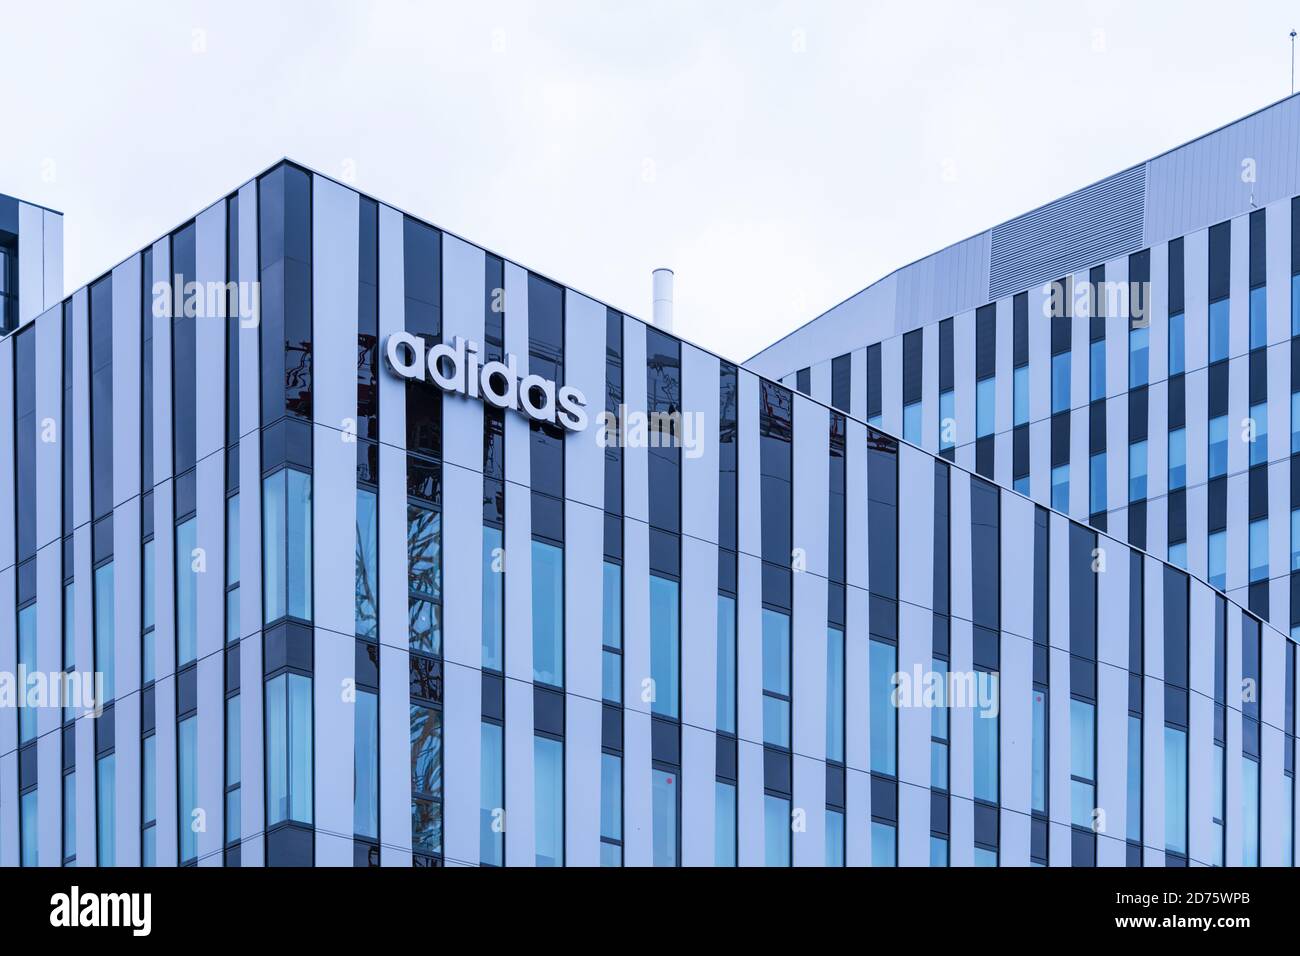 Strasbourg, France - Oct 18, 2020: Low angle view of Adidas sportswear  European headquarter logotype on the building Stock Photo - Alamy